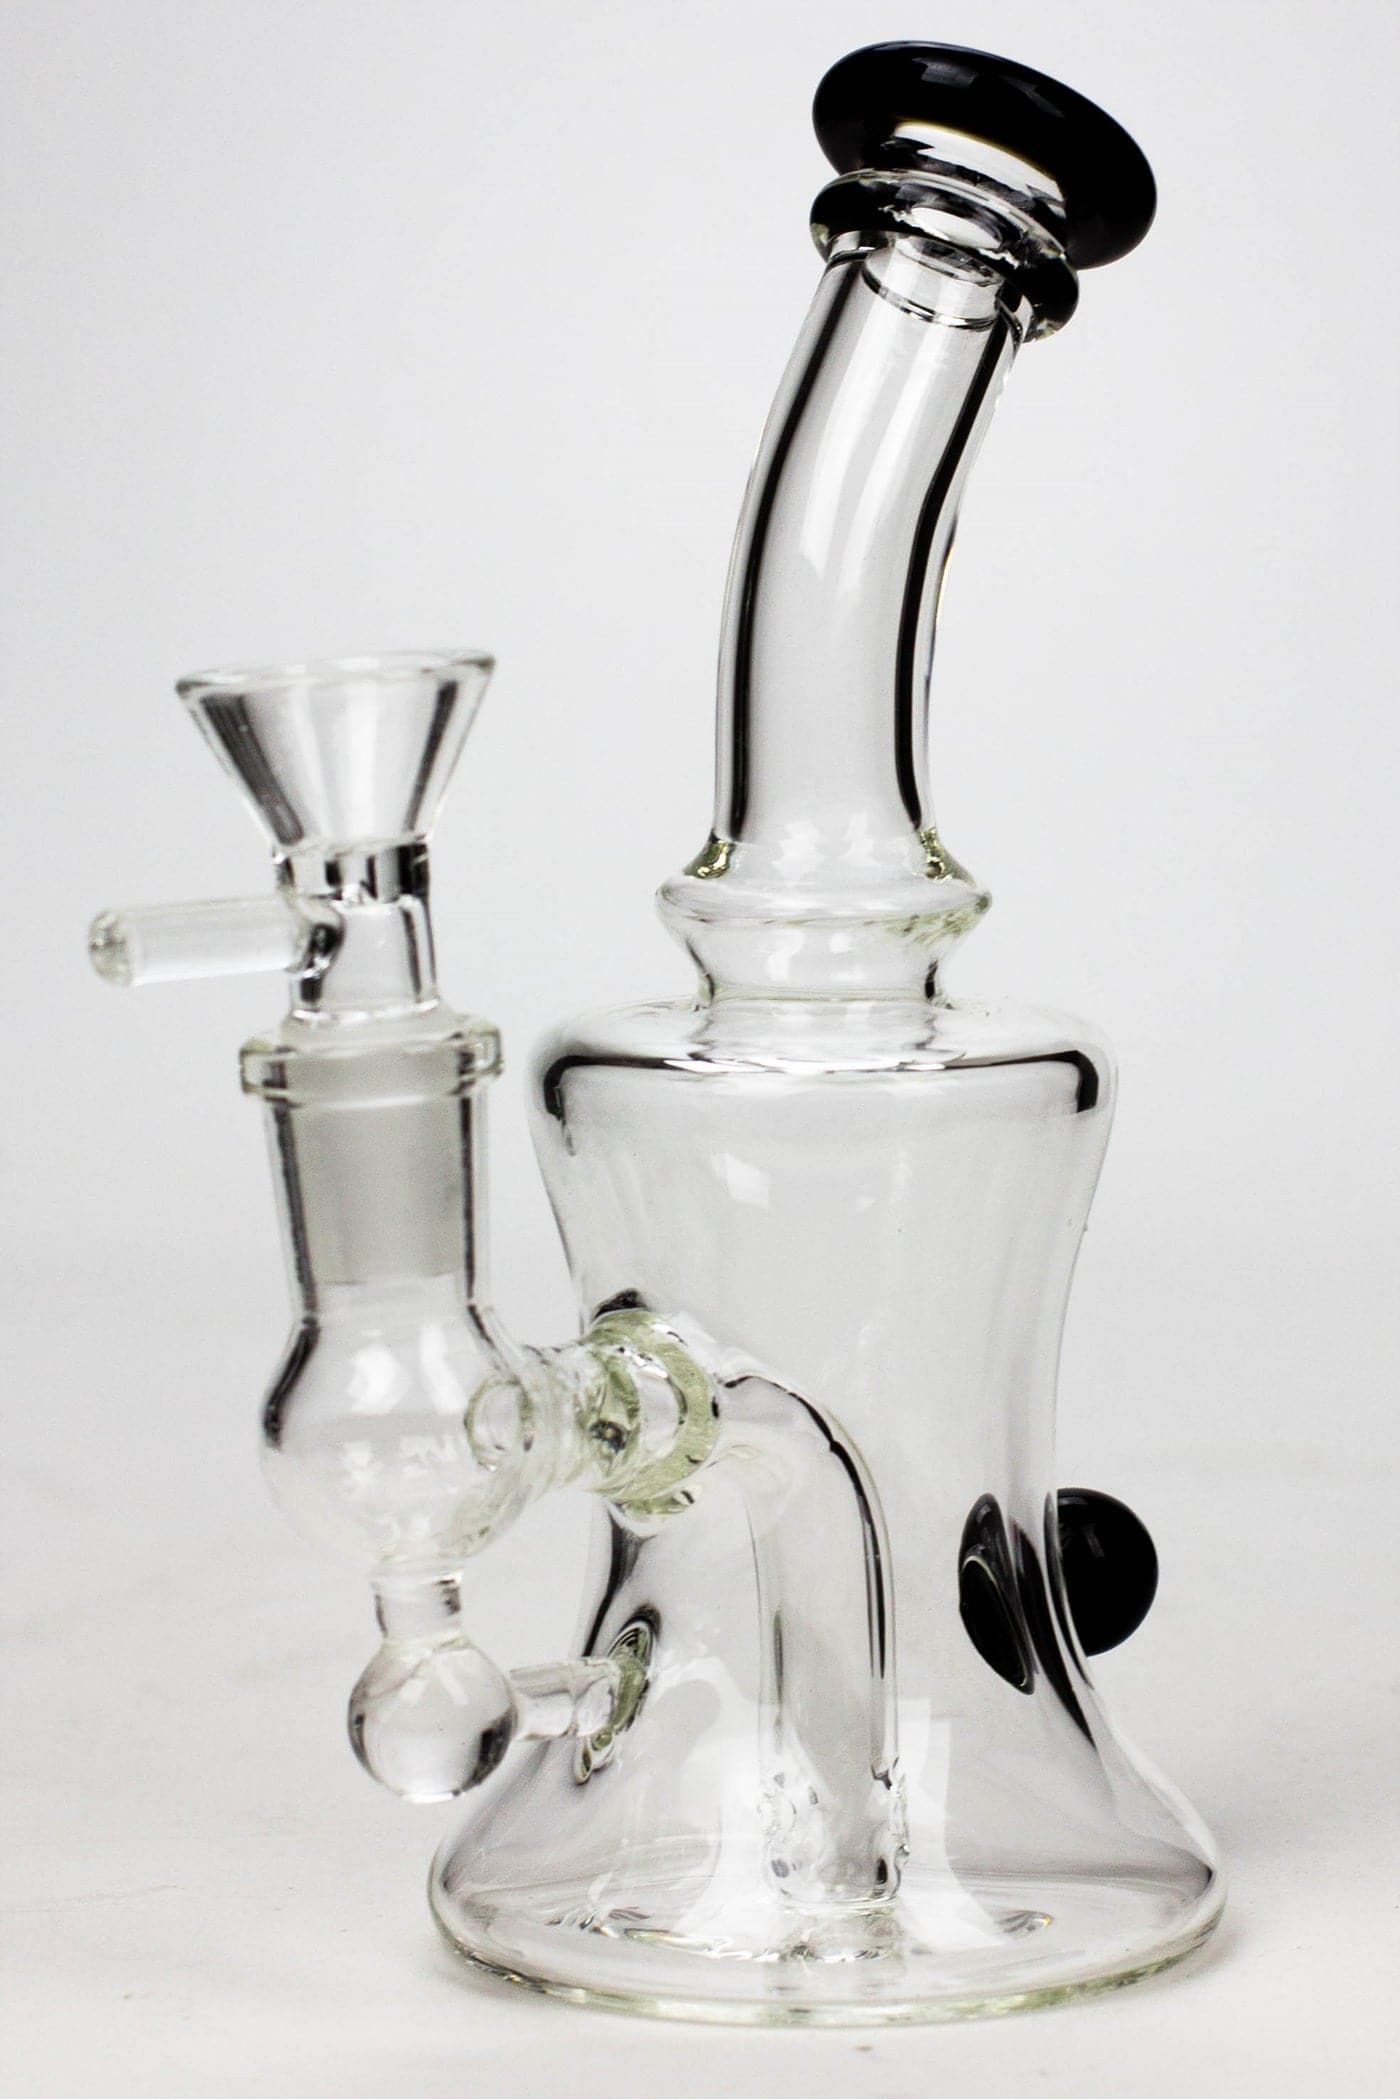 Fixed 3 hole diffuser skirt bubbler_13